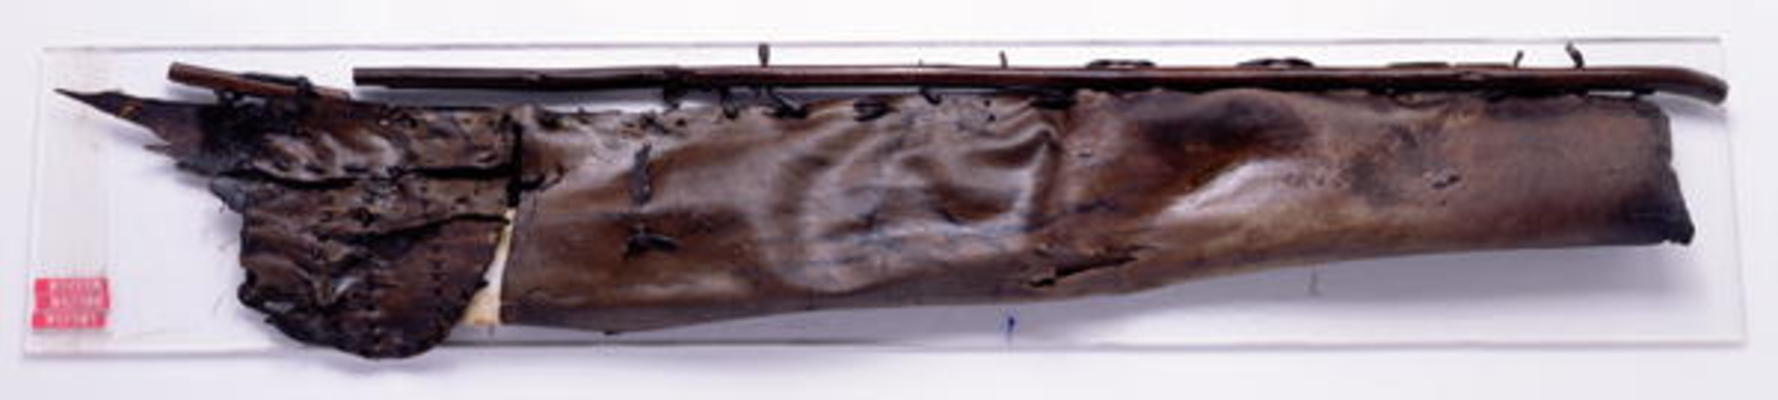 Quiver found with the Oetzi Iceman (chamois leather) à Âge du Cuivre